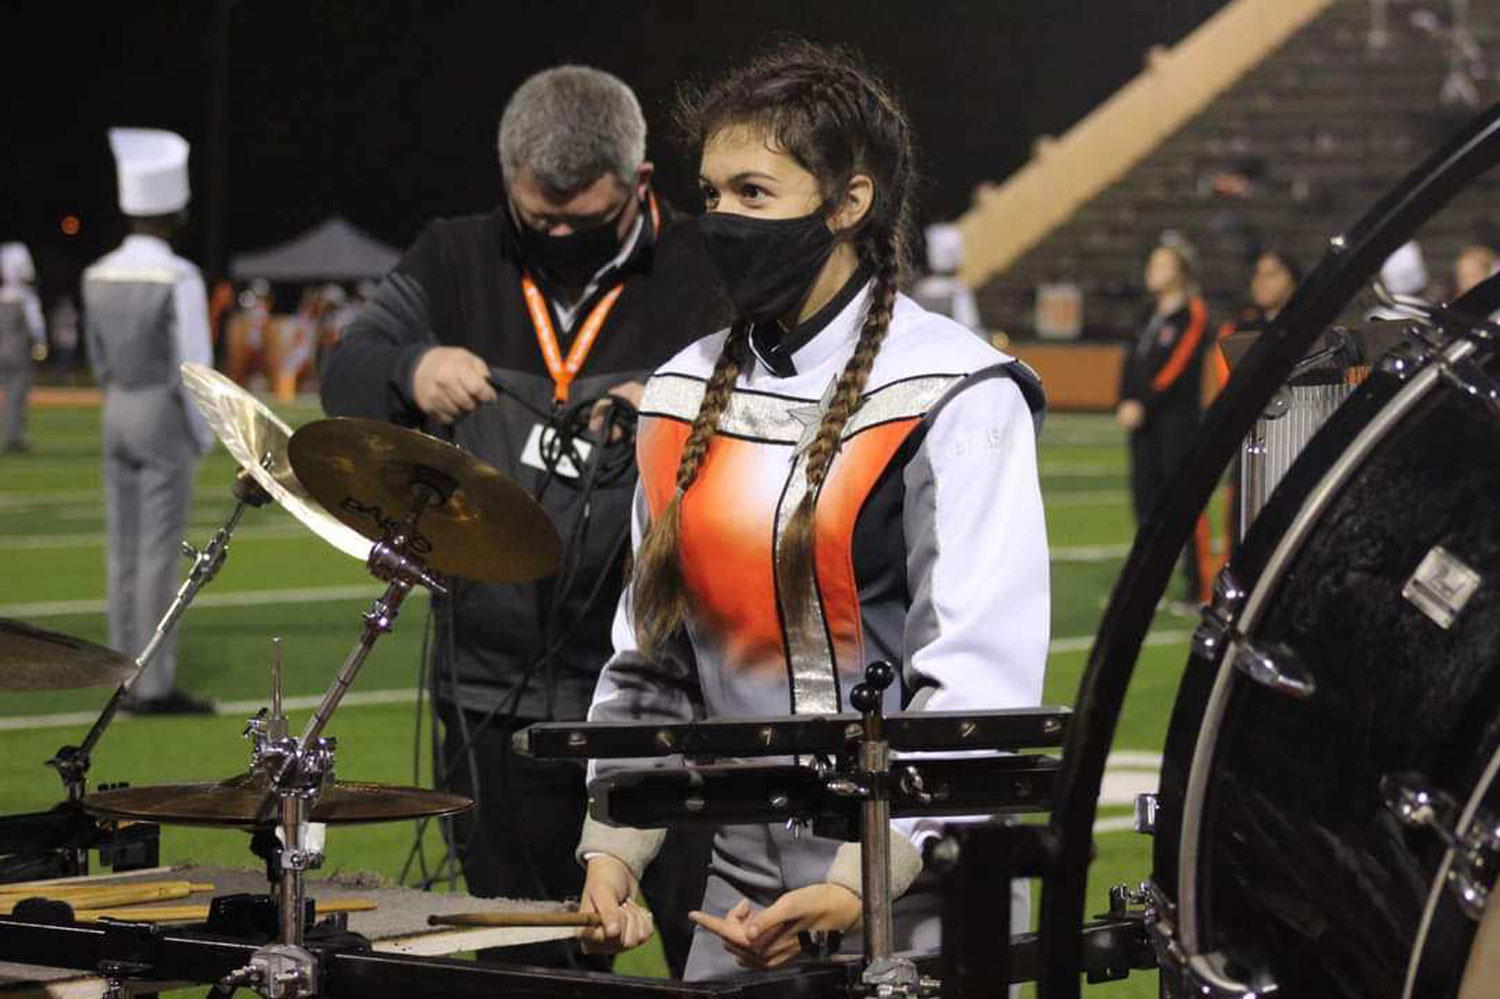 SUBMITTED PHOTO BY LOUREDES QUIJAS: Looking ahead, Lourdes Quijas stands in front of her instrument before their half time show during a football game her freshman year.